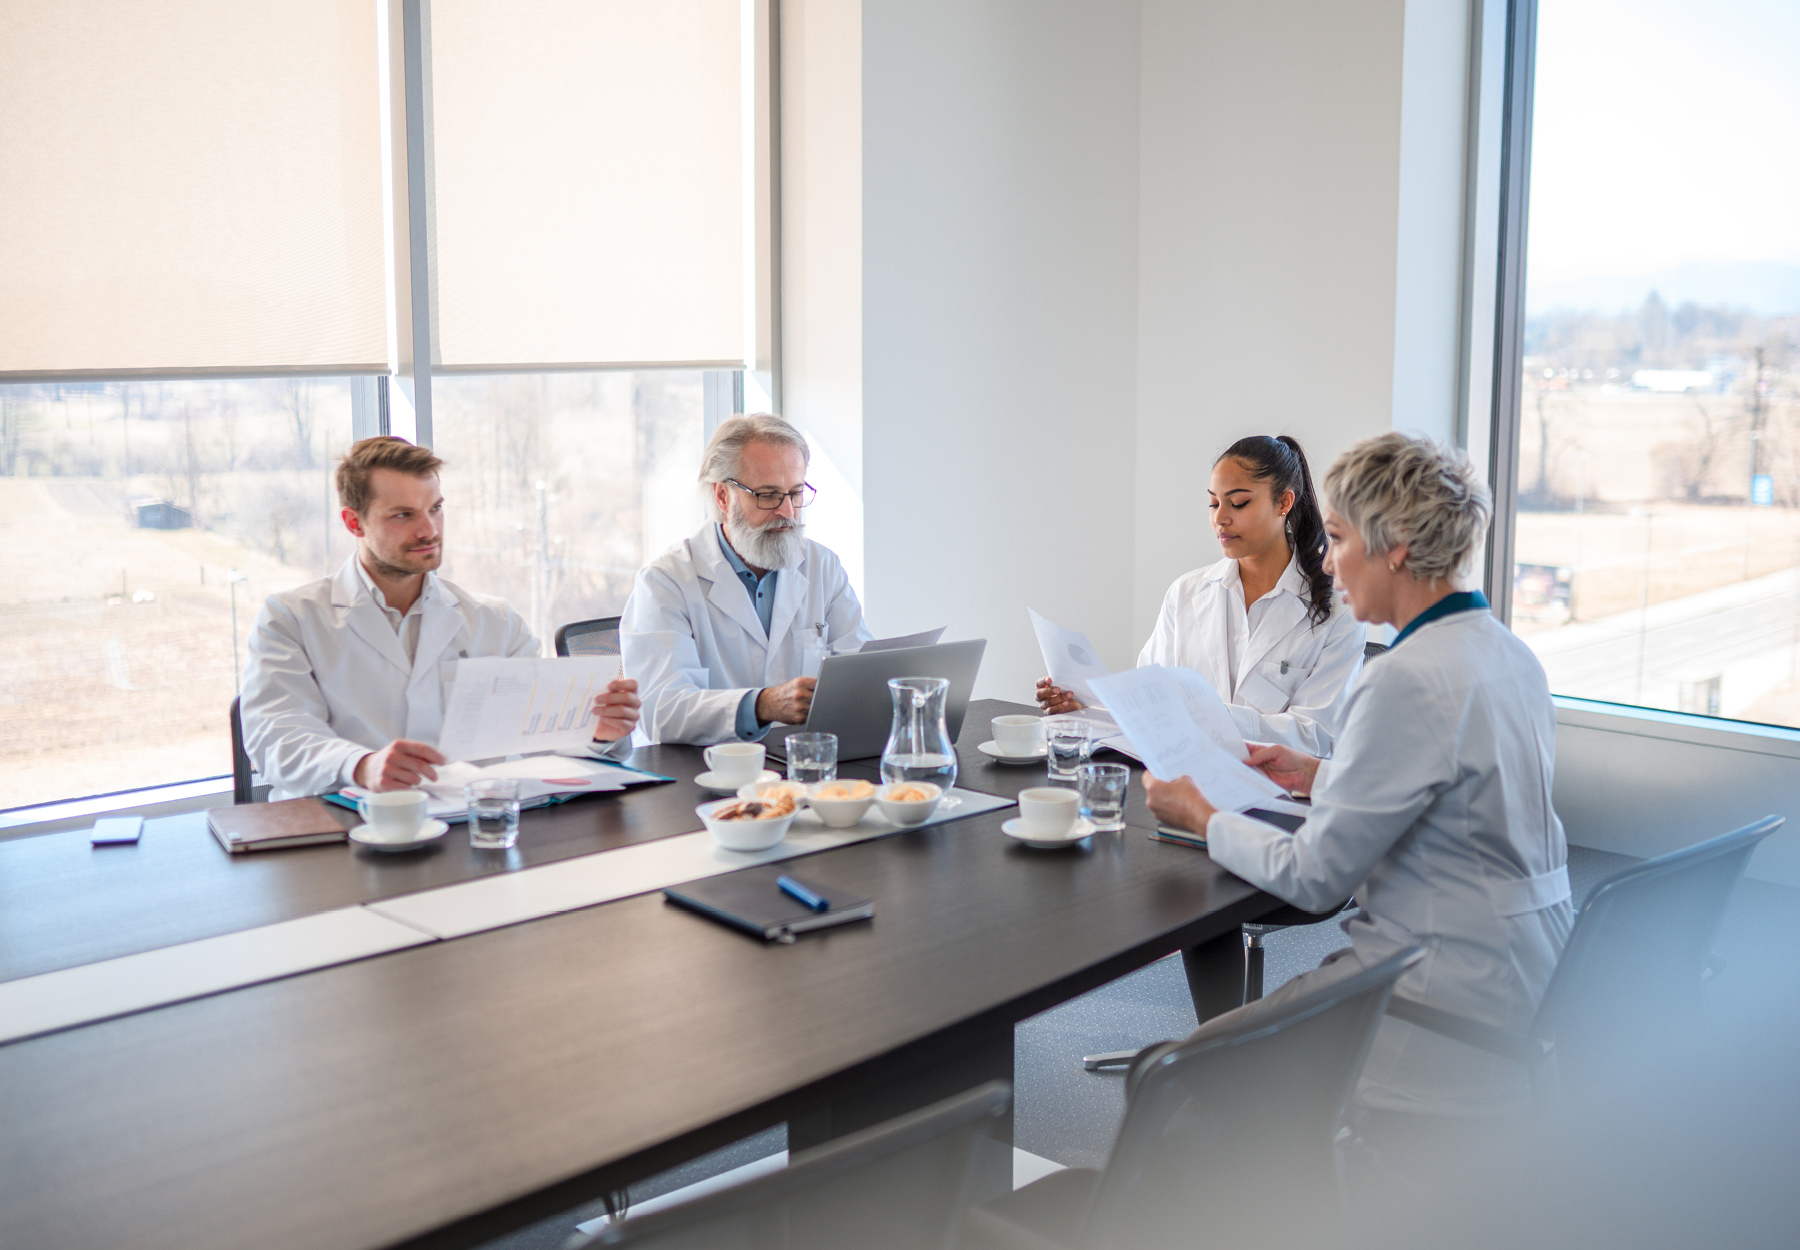 Group of laboratory board members meeting in a boardroom in an office building. iStock image.